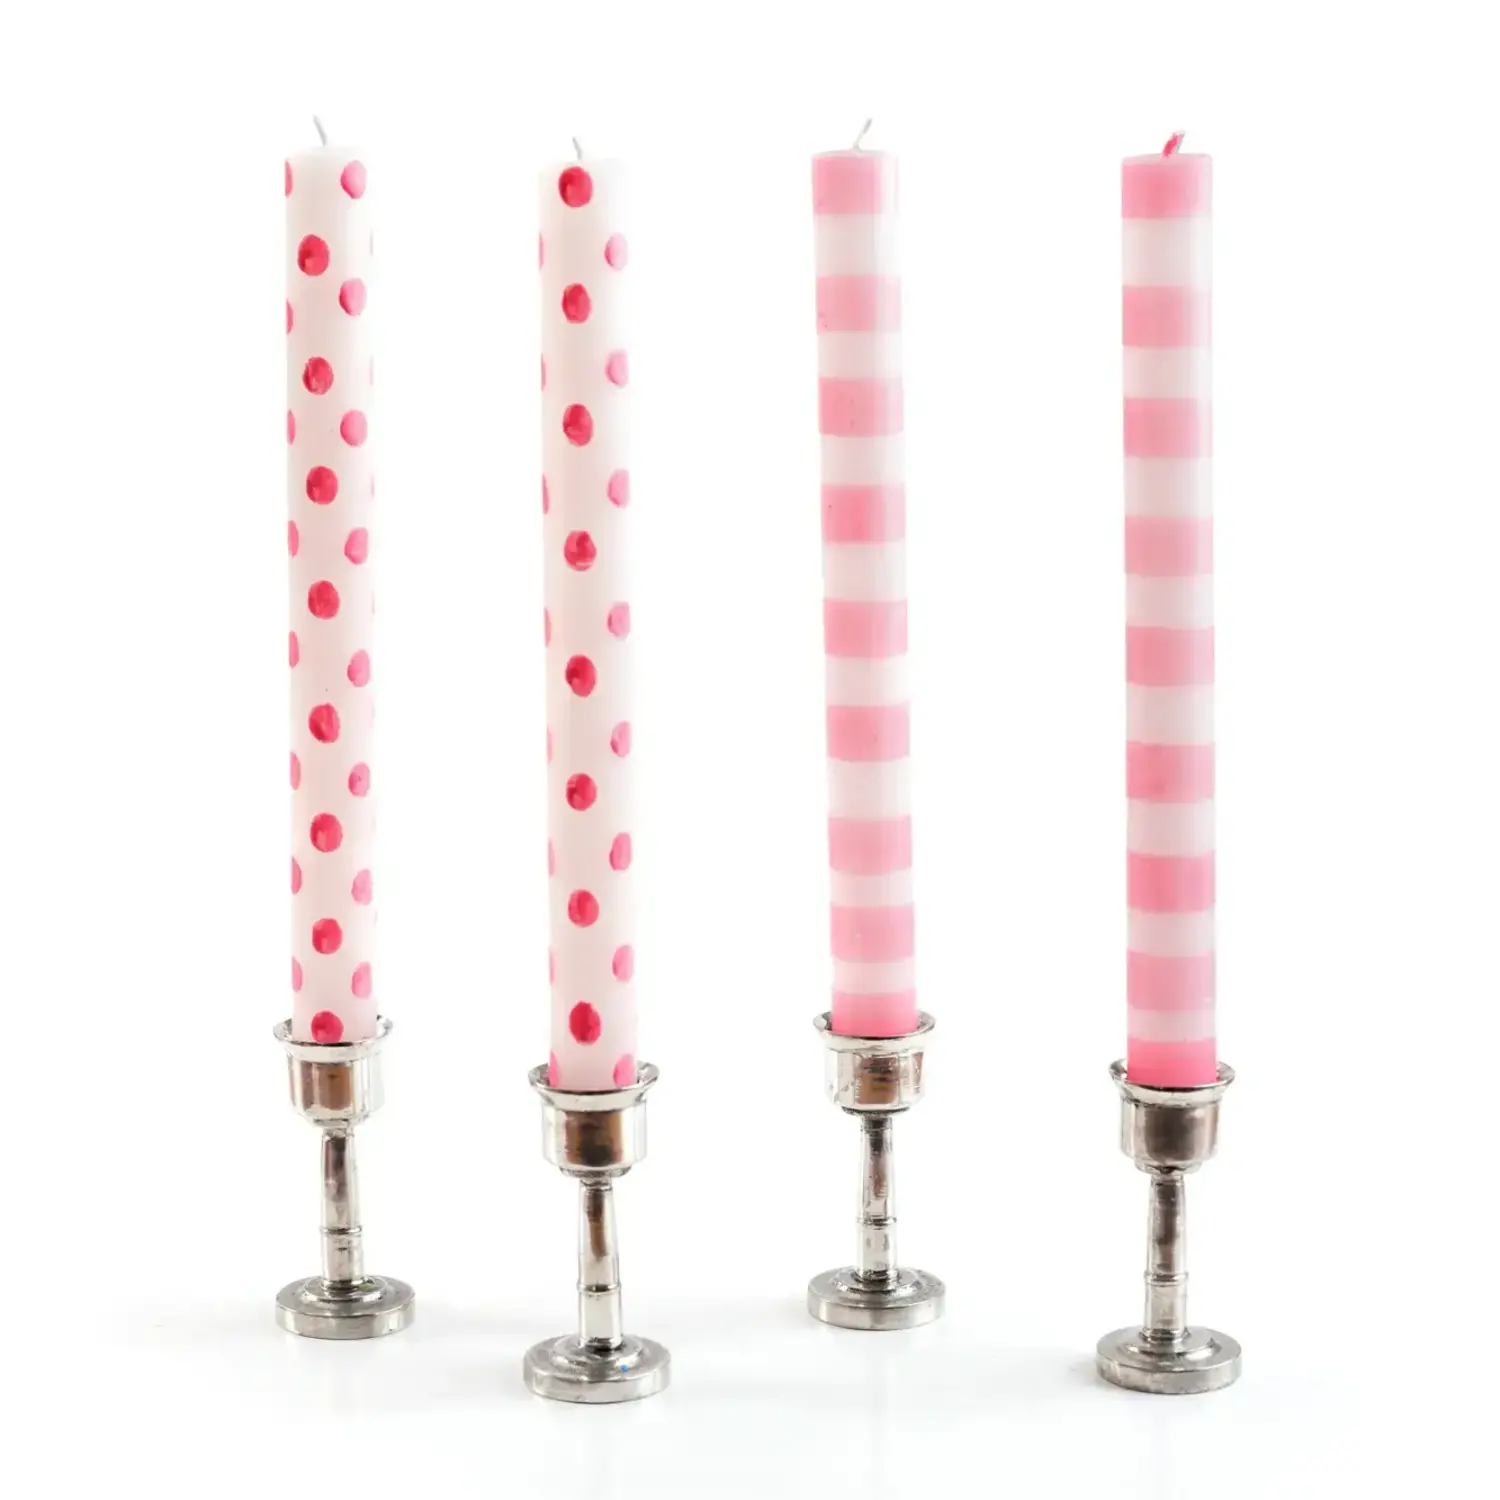  MUUFAZA Wax Dots Candles and Candle Holders,Candle Adhesive,Candle  Sticky dots, Candle Accessories - (4 Pack,112 Dots)